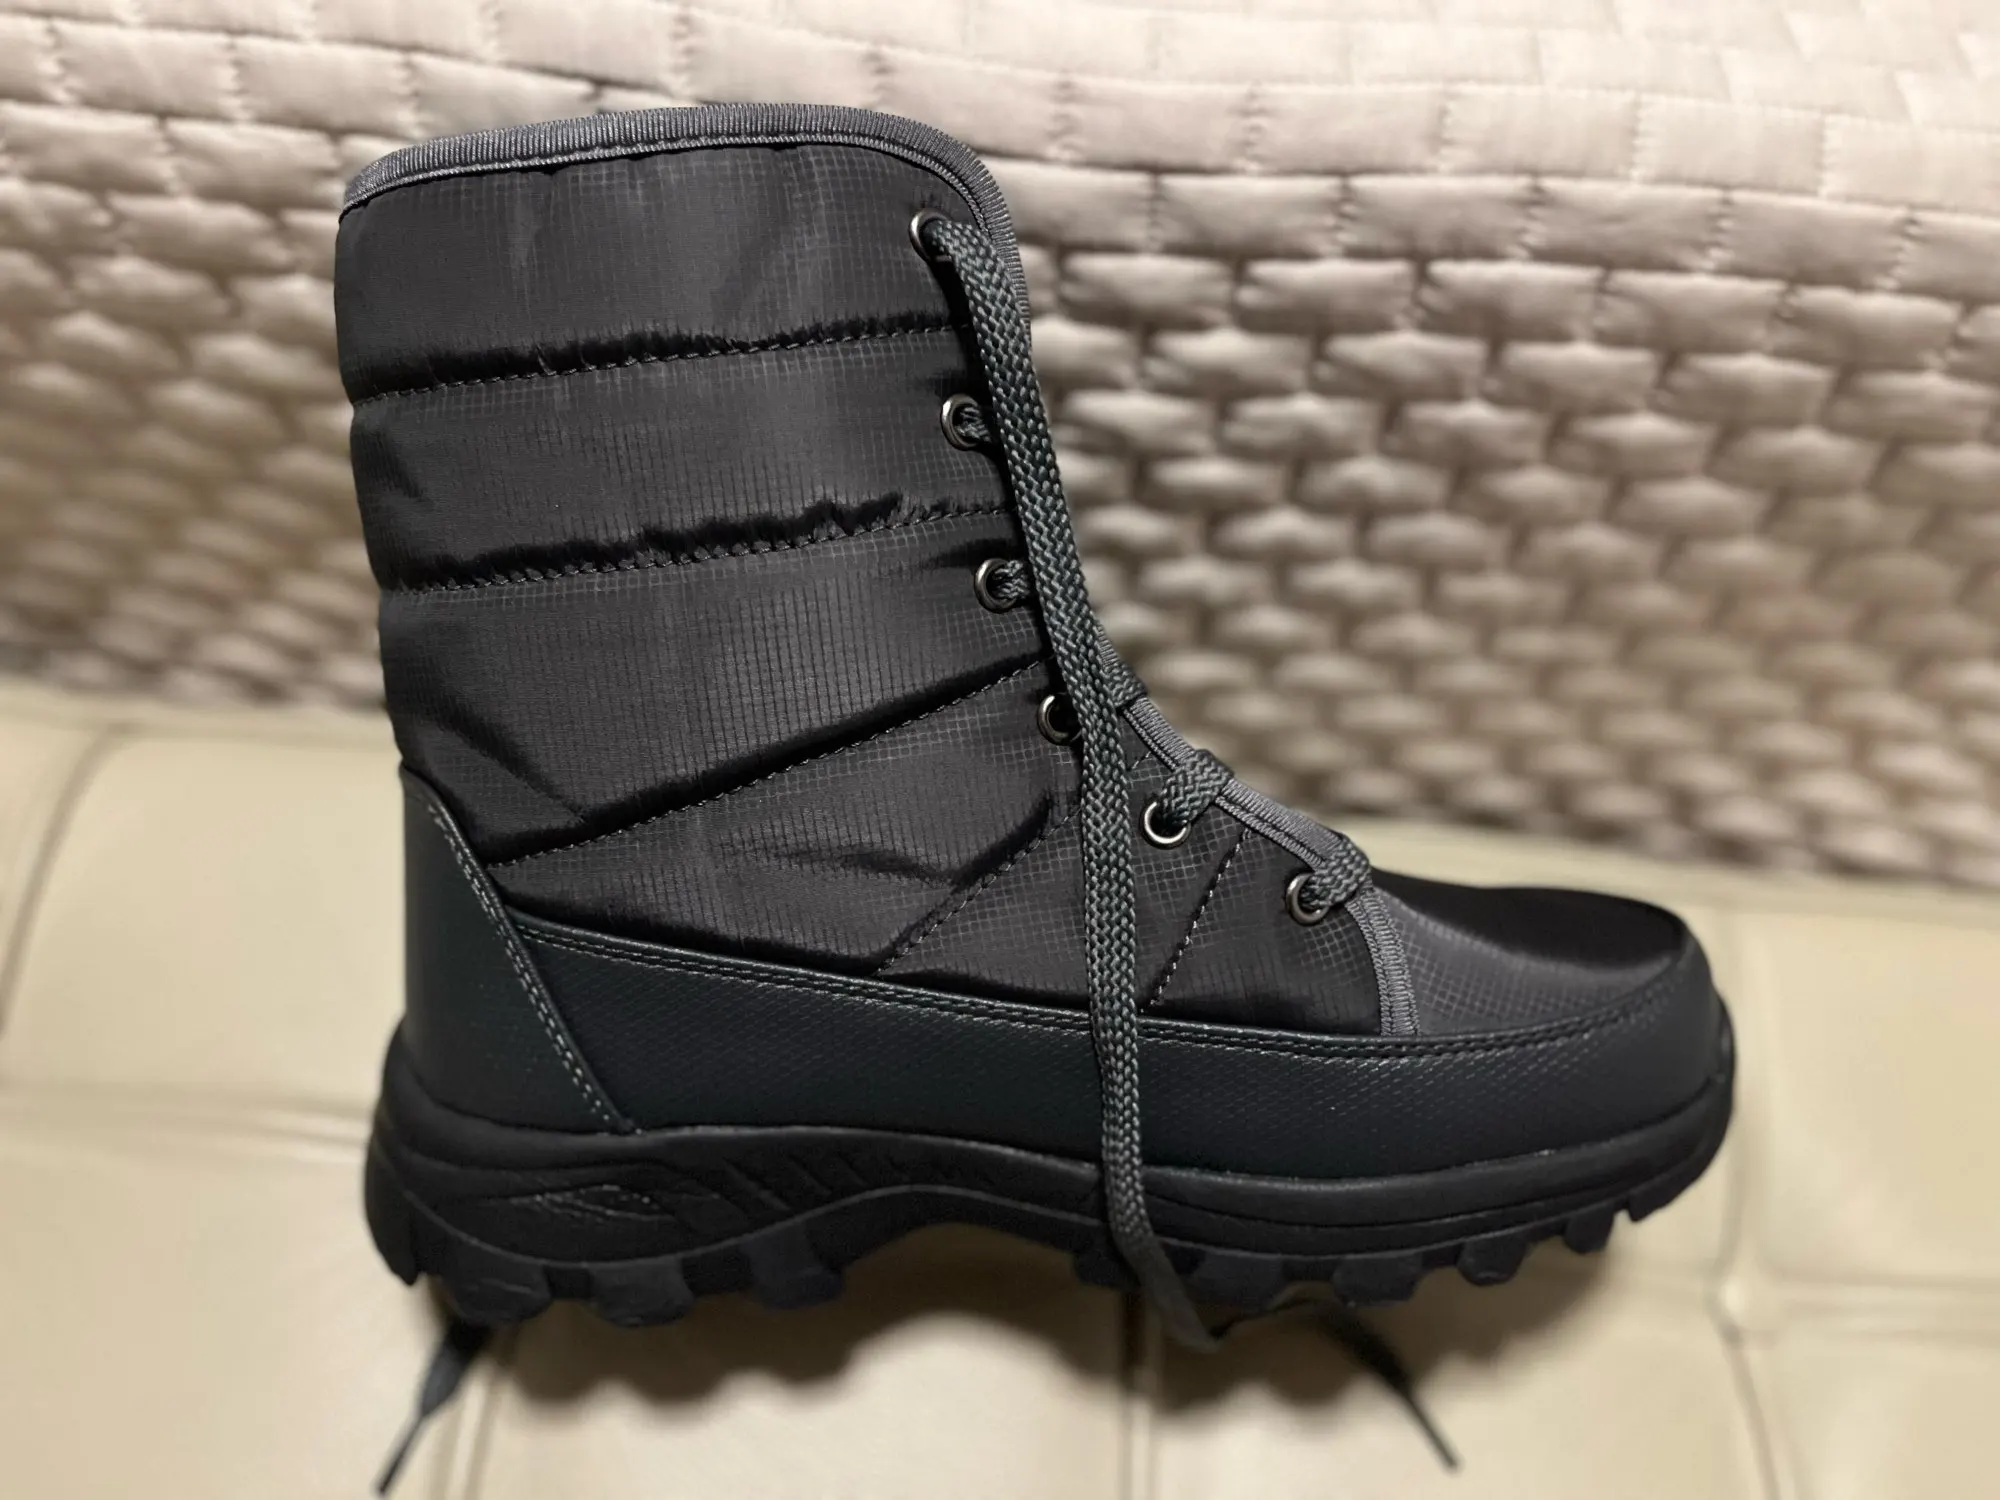 New Outdoor Men Boots Winter Snow Boots For Men Shoes Thick Plush Waterproof Slip-Resistant Keep Warm Winter Shoes Plus Size 46 photo review